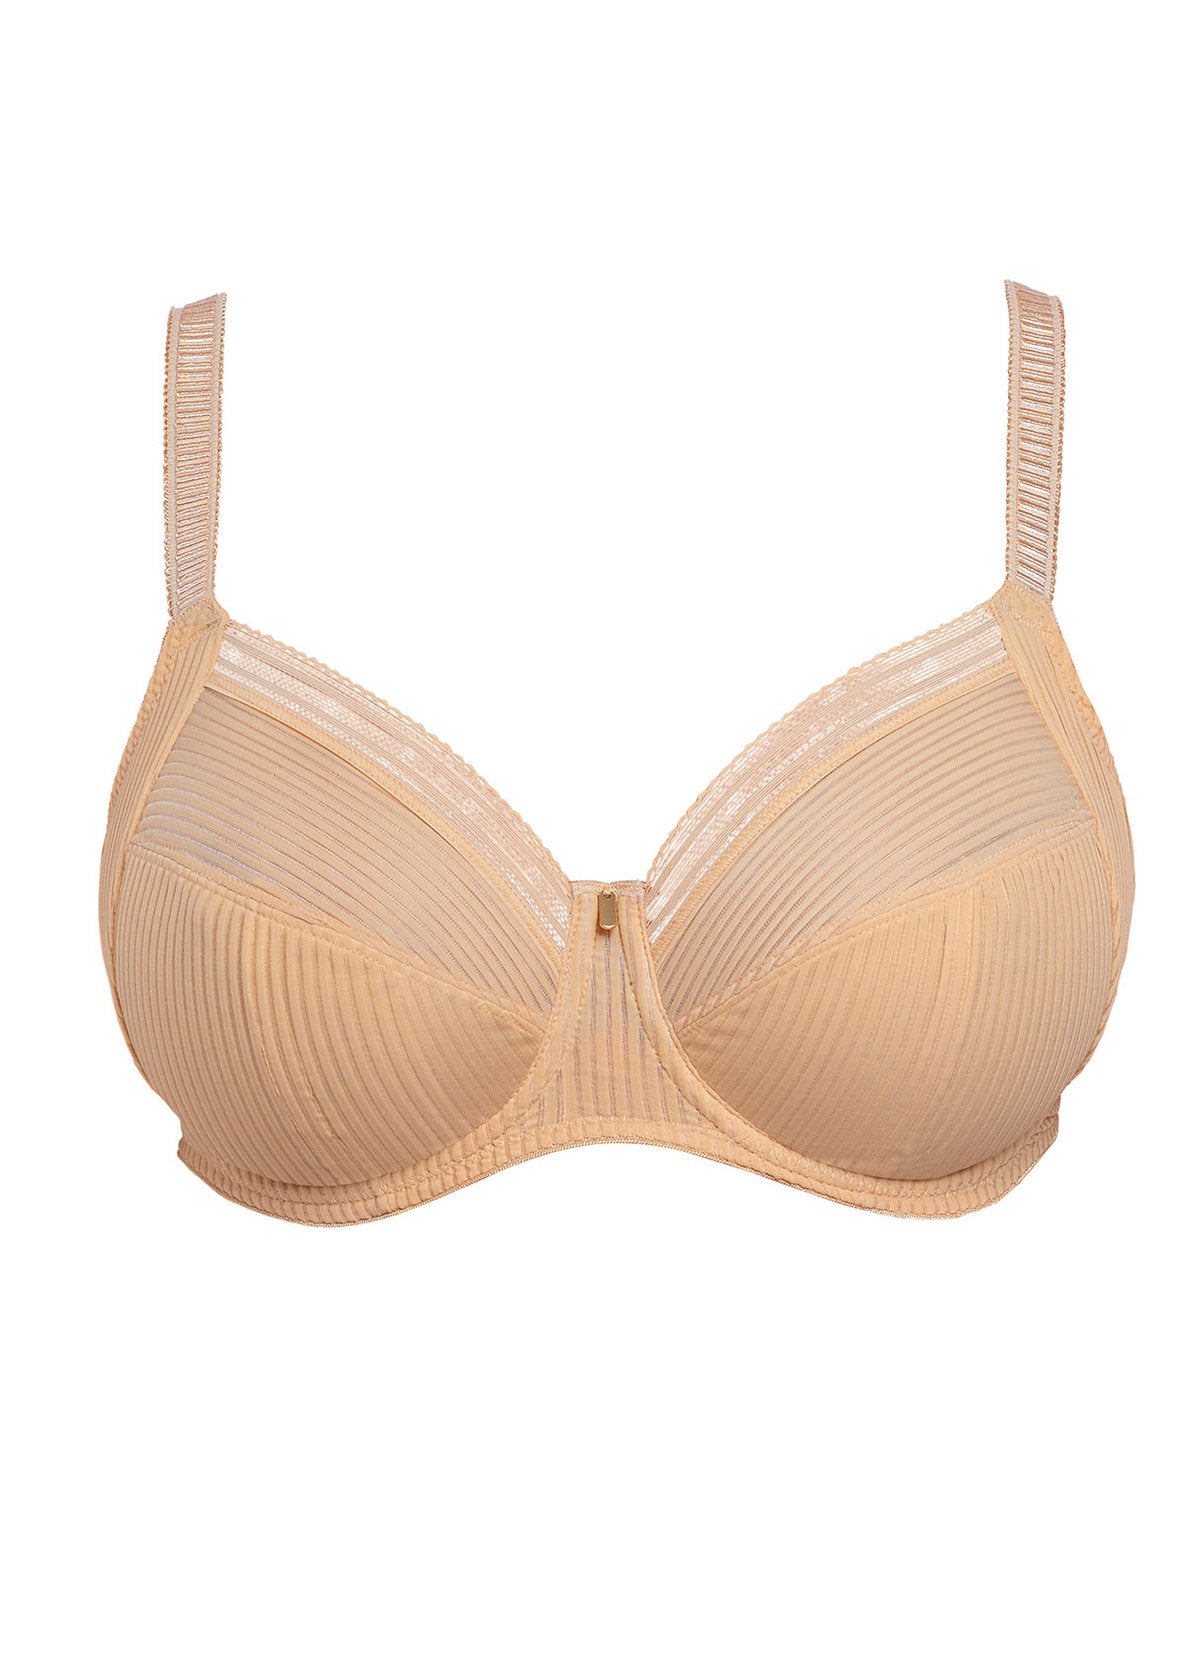 Fantasie Fusion Full Cup Side Support Bra - Sand